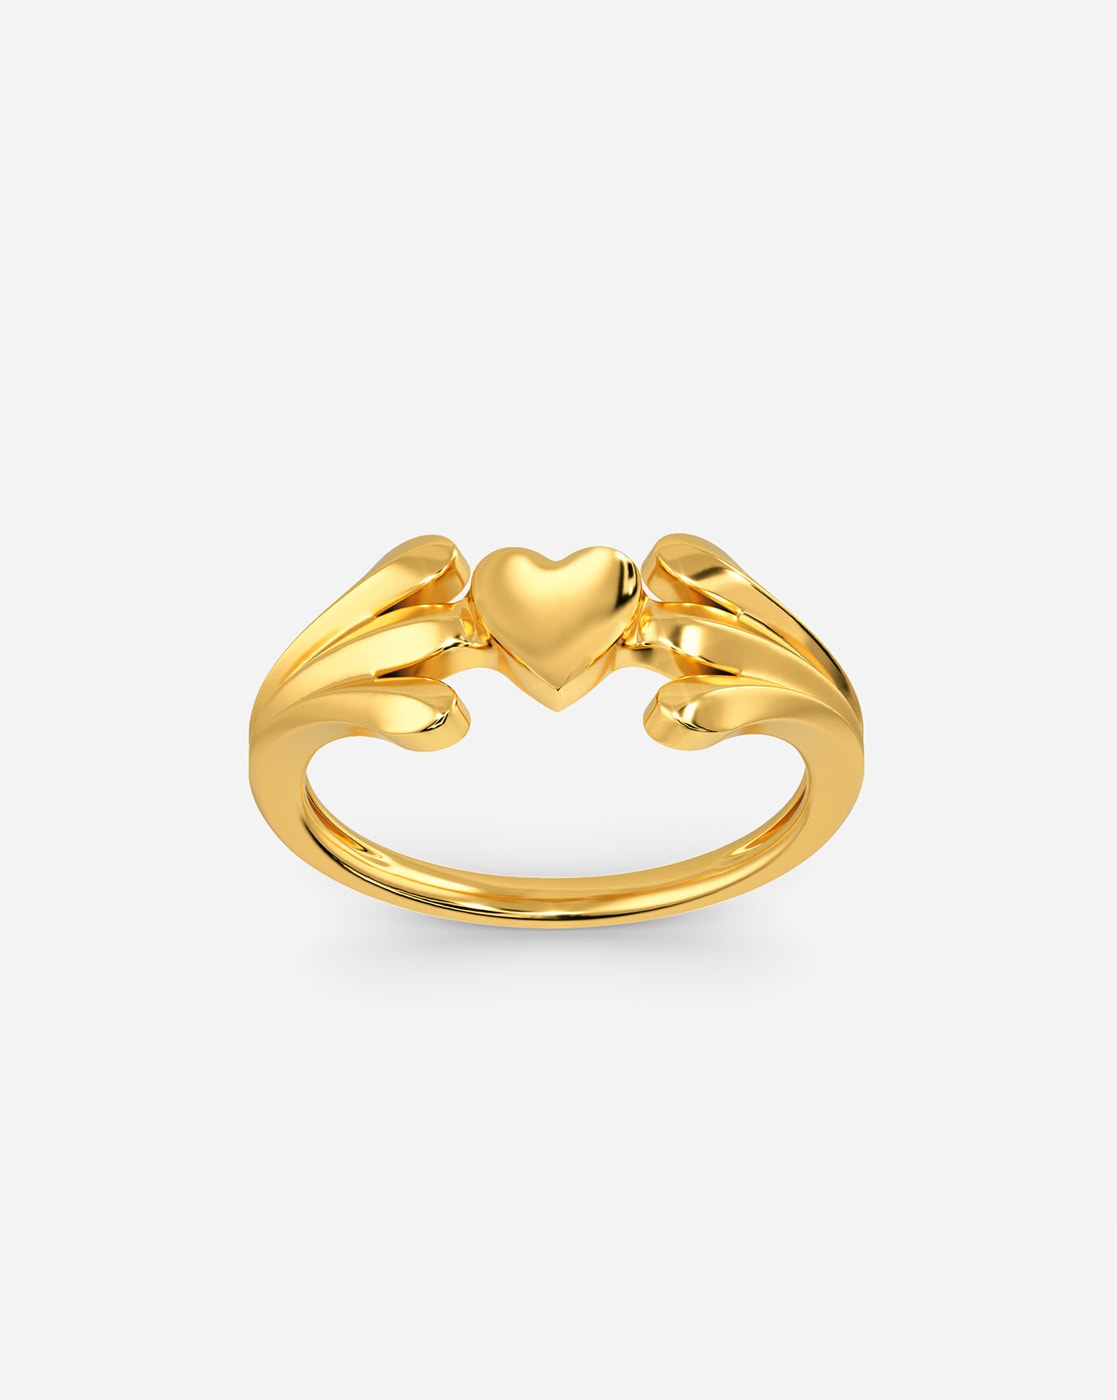 Rings for Women,Wedding Jewelry,New 24k Ring,Golden Color,For Girls,Wedding,Reusable  Ring,African Gift and Wife